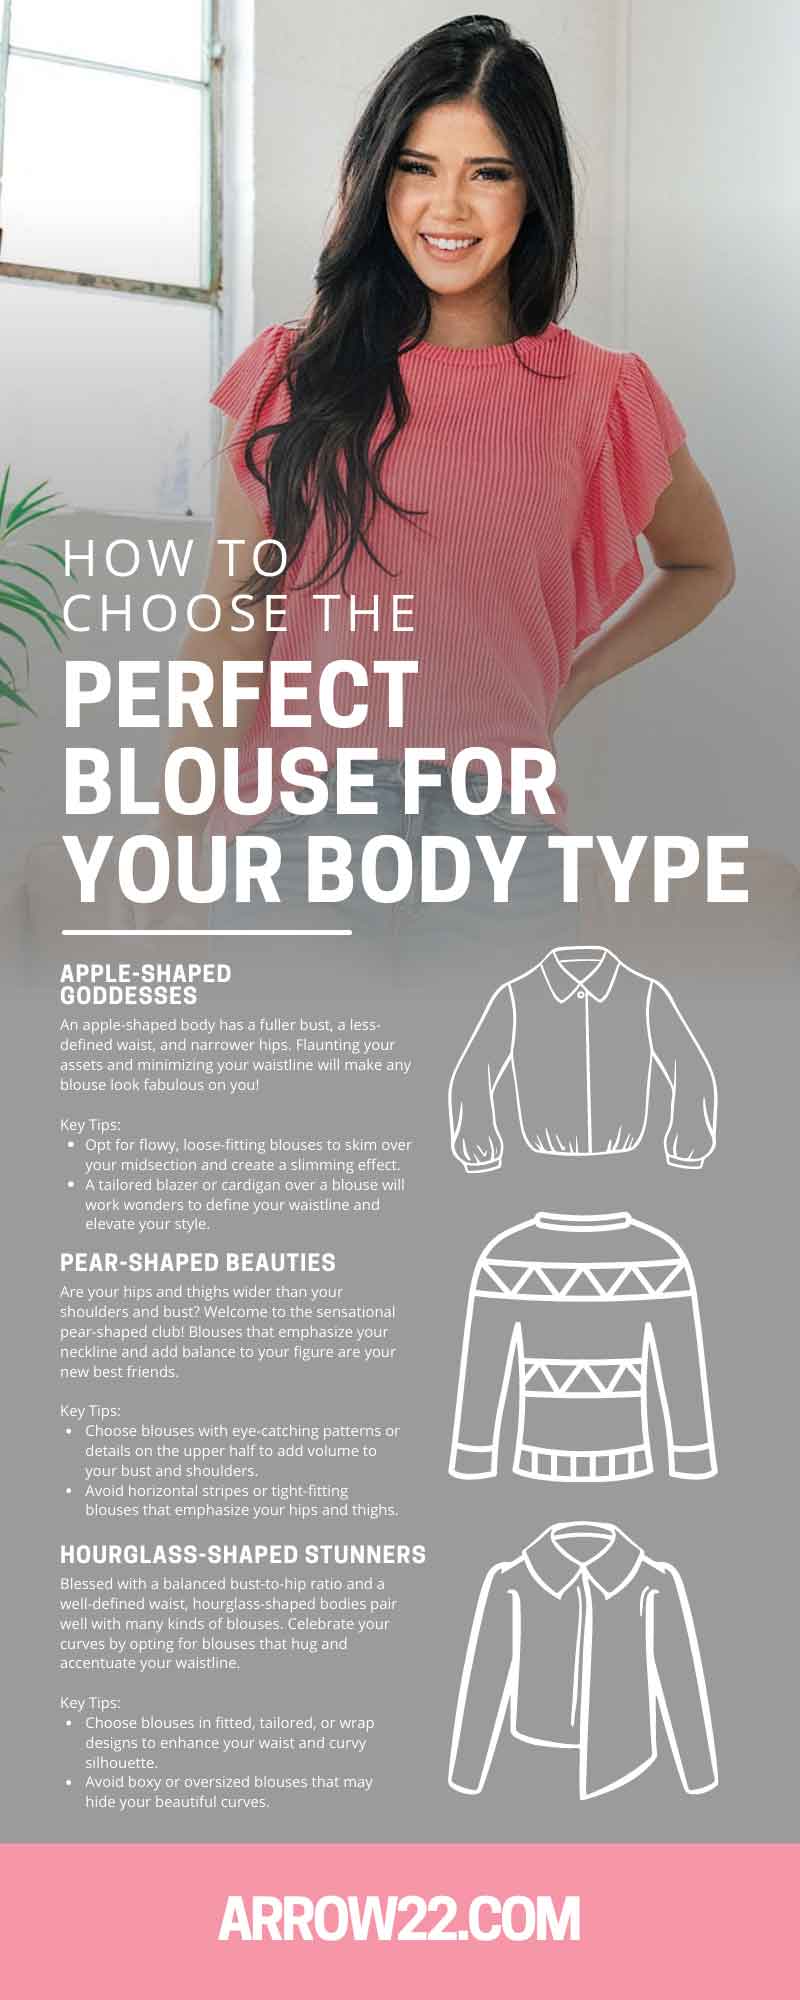 How To Choose the Perfect Blouse for Your Body Type